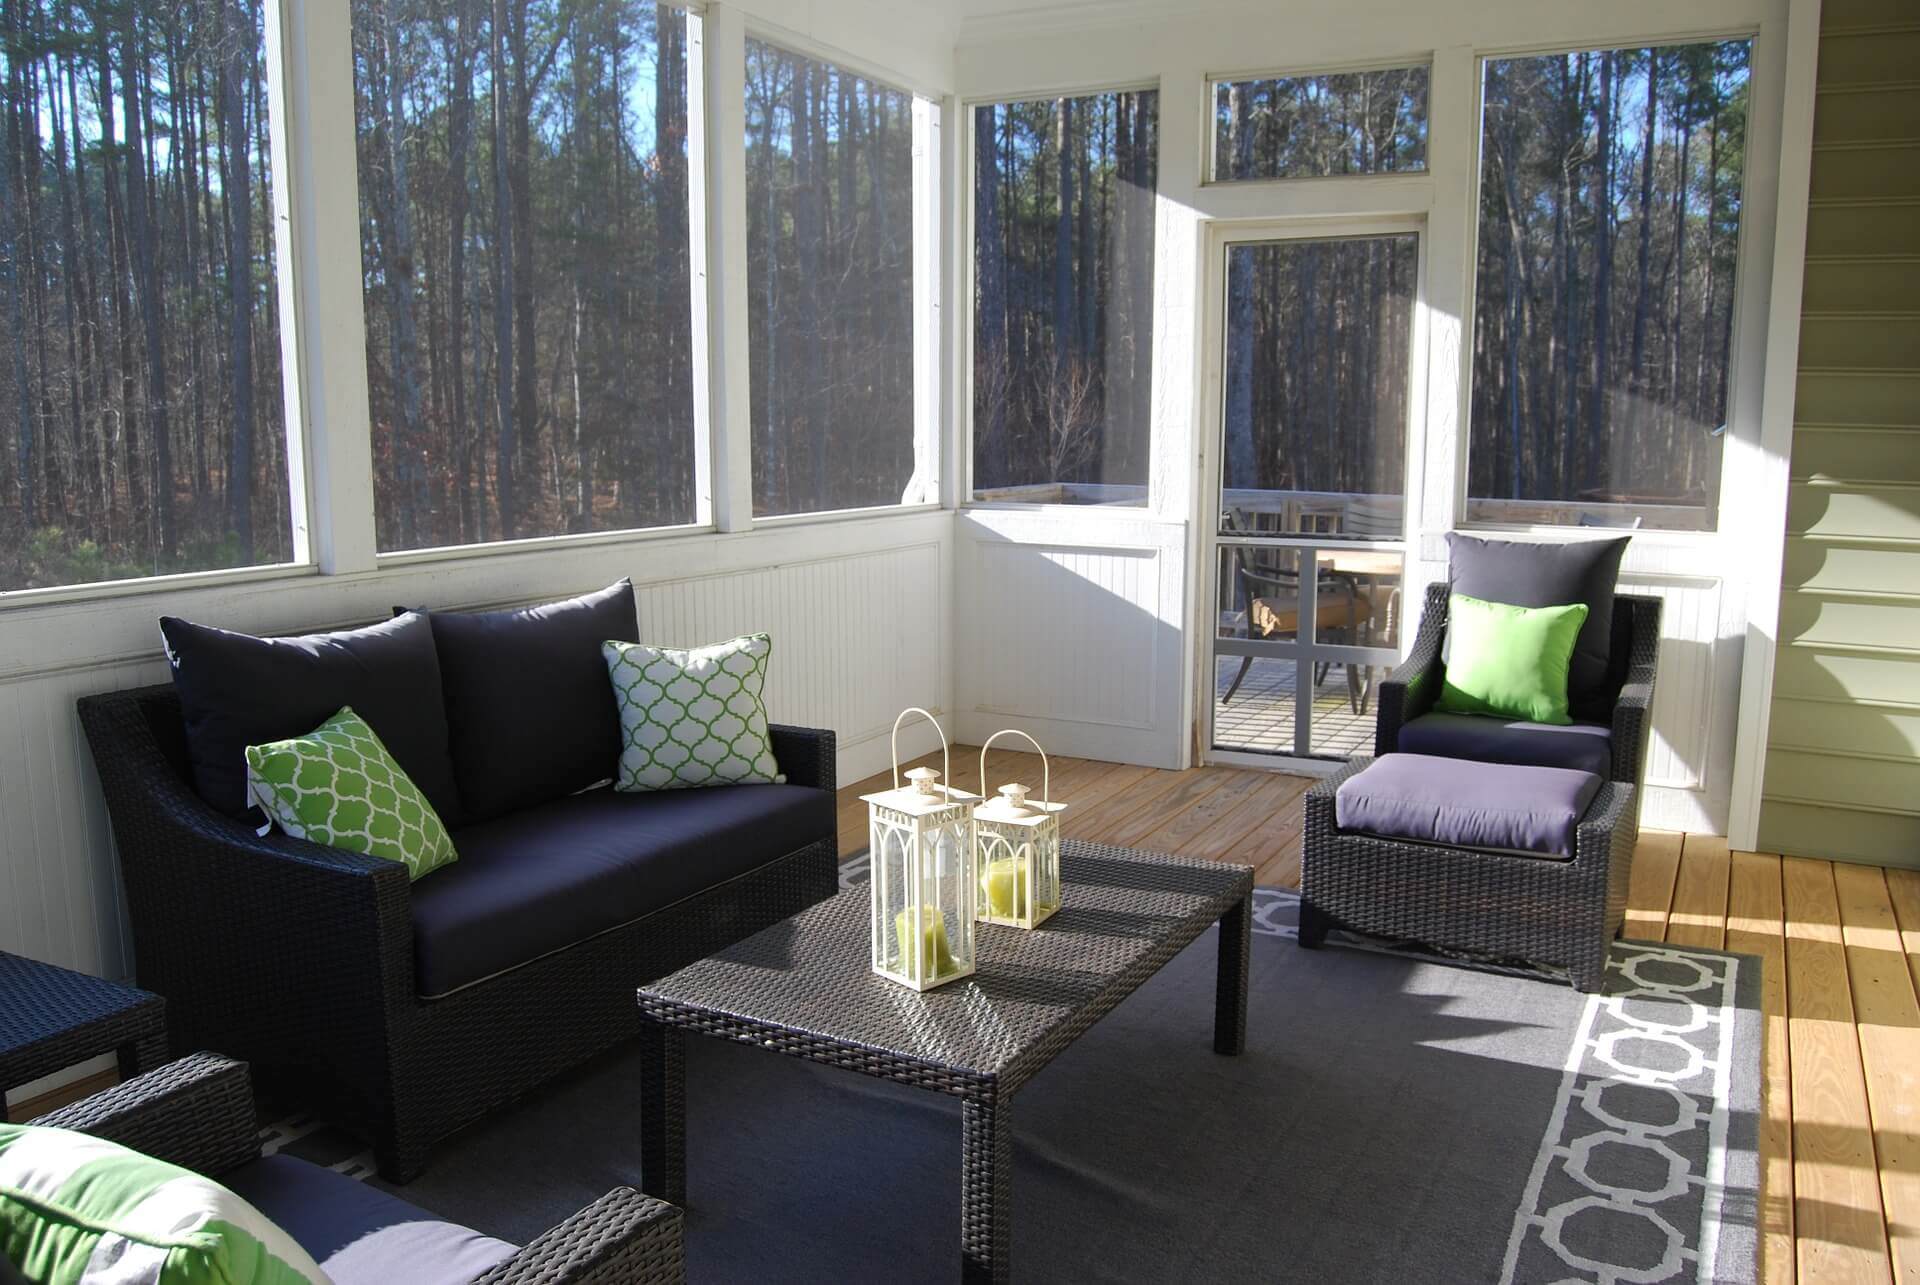 Sunroom with light wood floors, and dark furniture, surrounded by forest